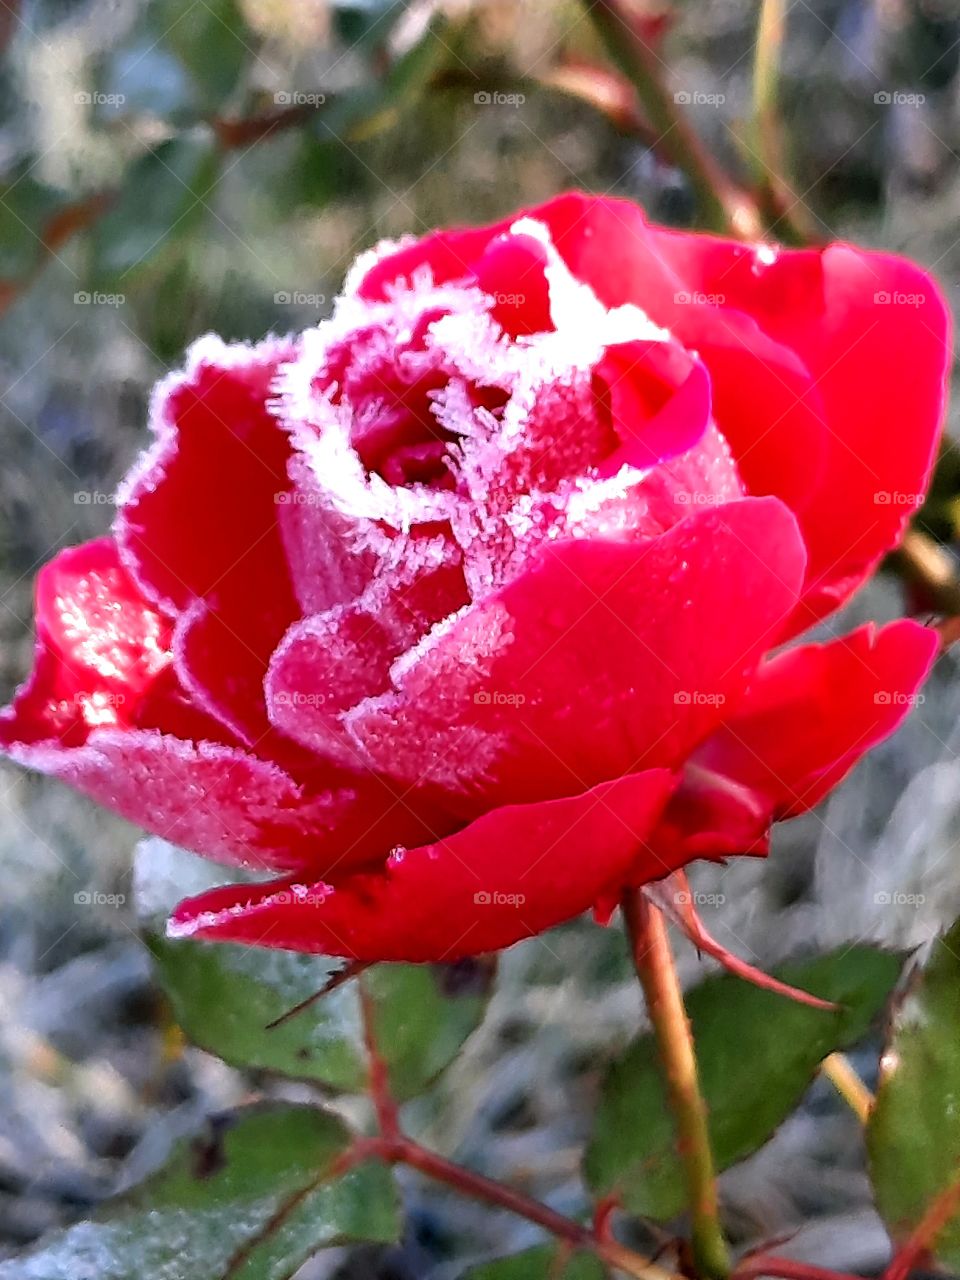 pop of color - red rose with frost on petals